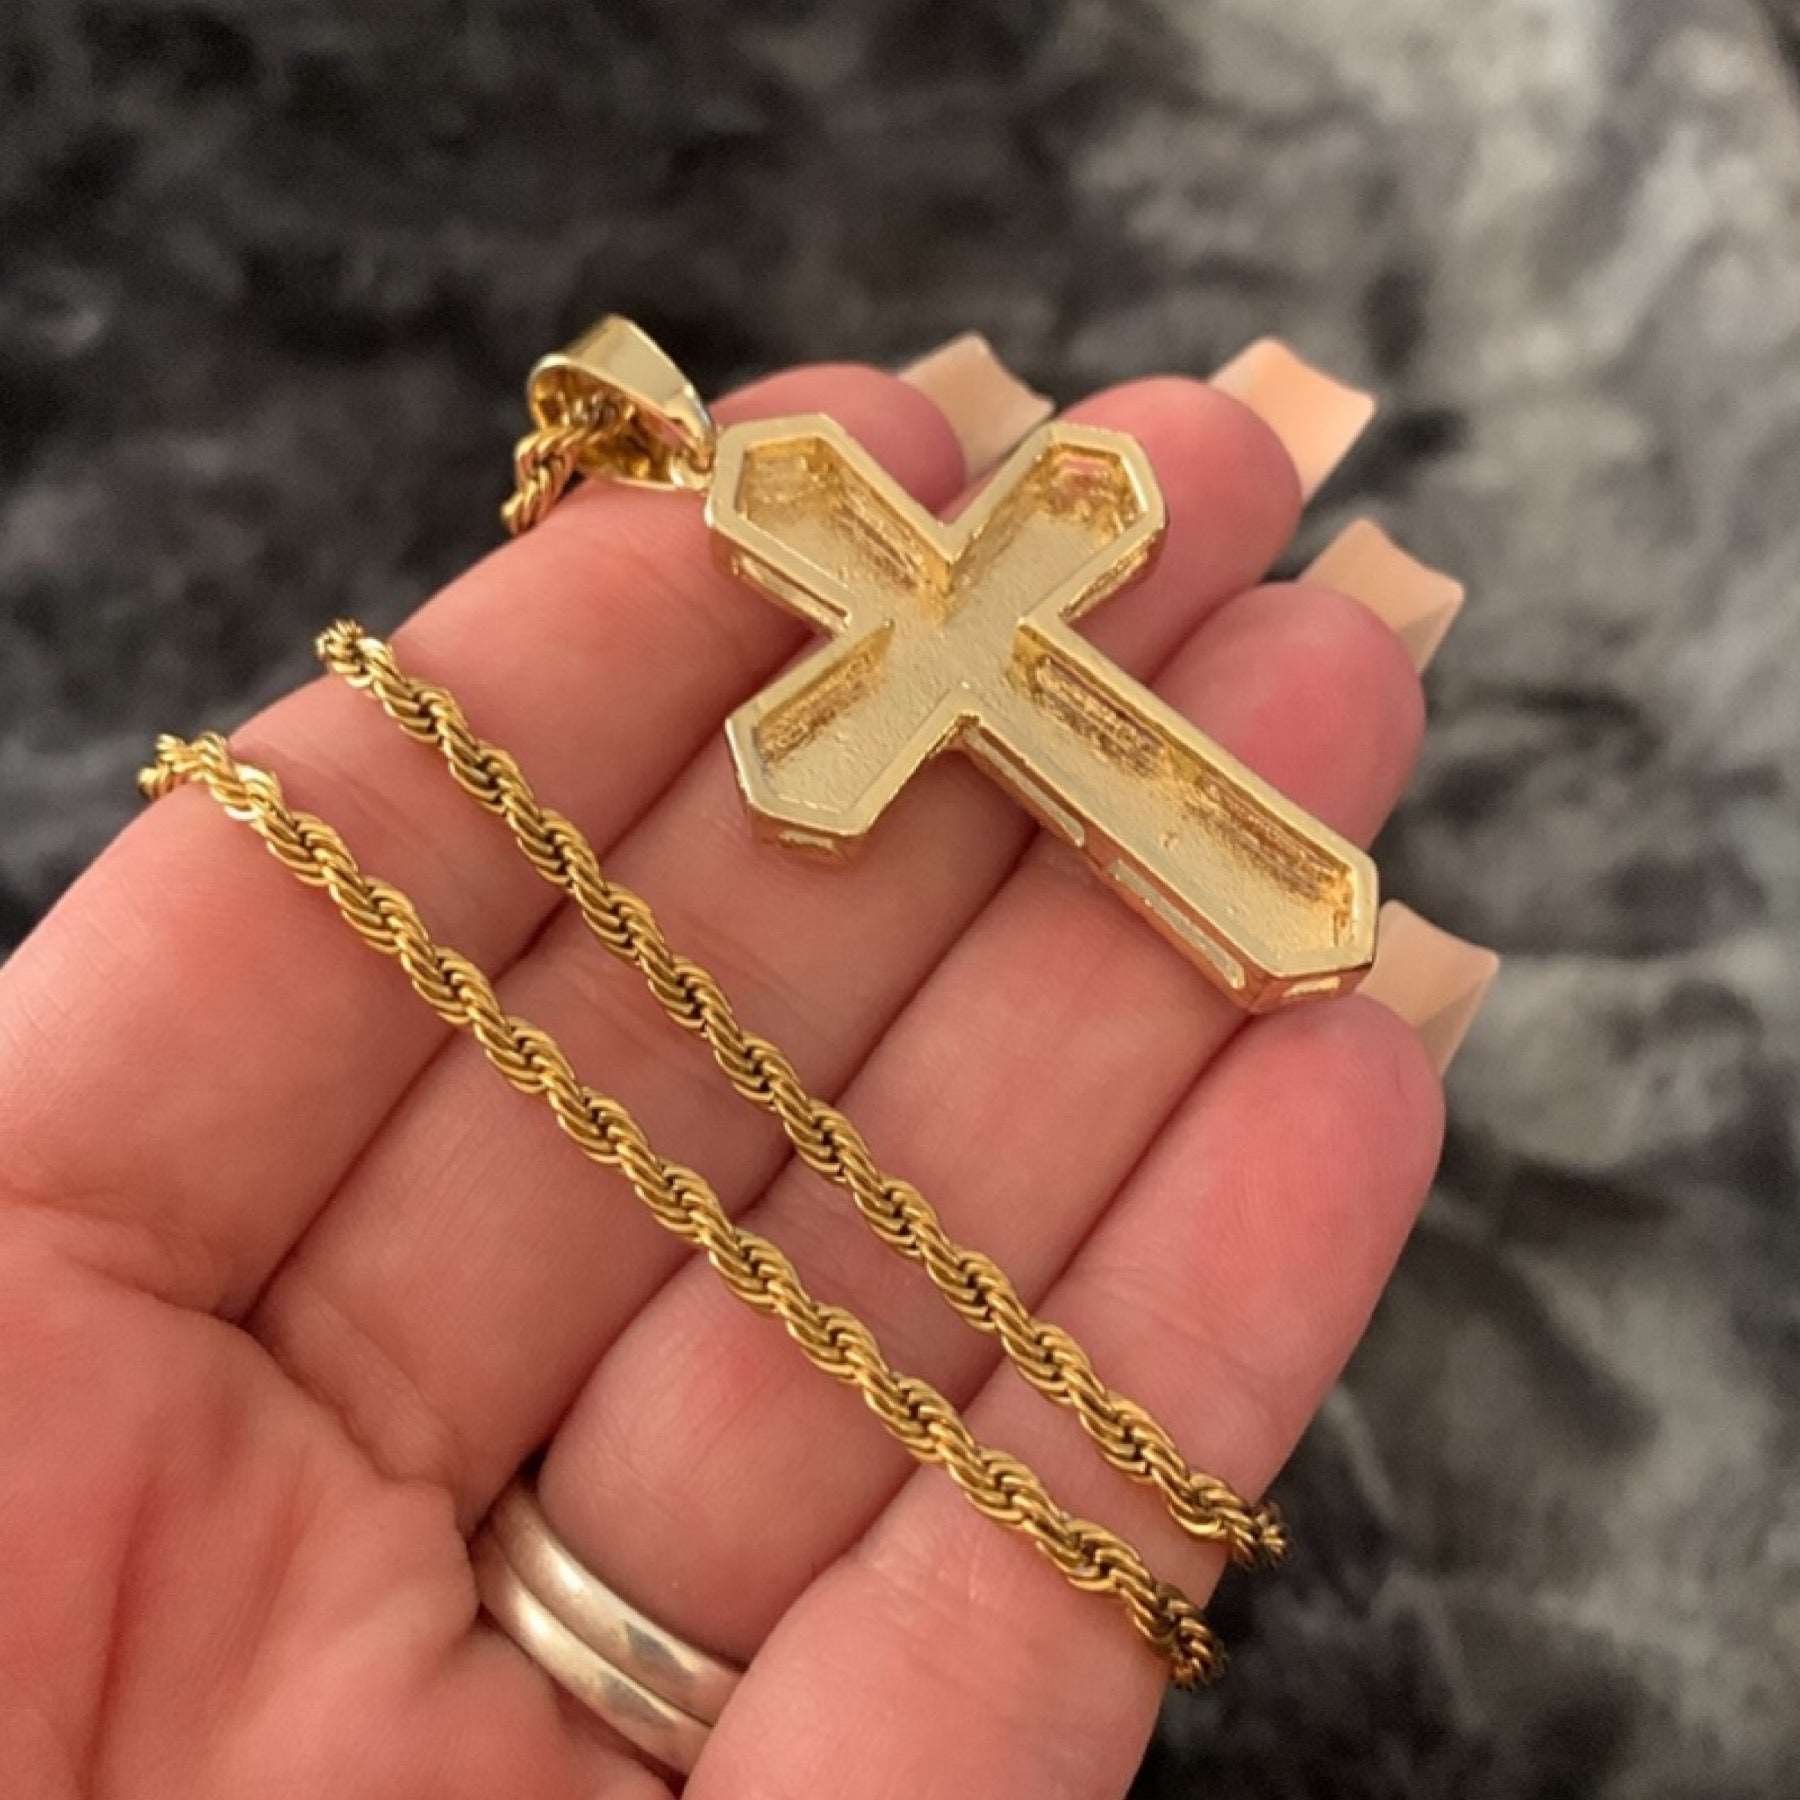 Gold CZ Covered Cross Necklace